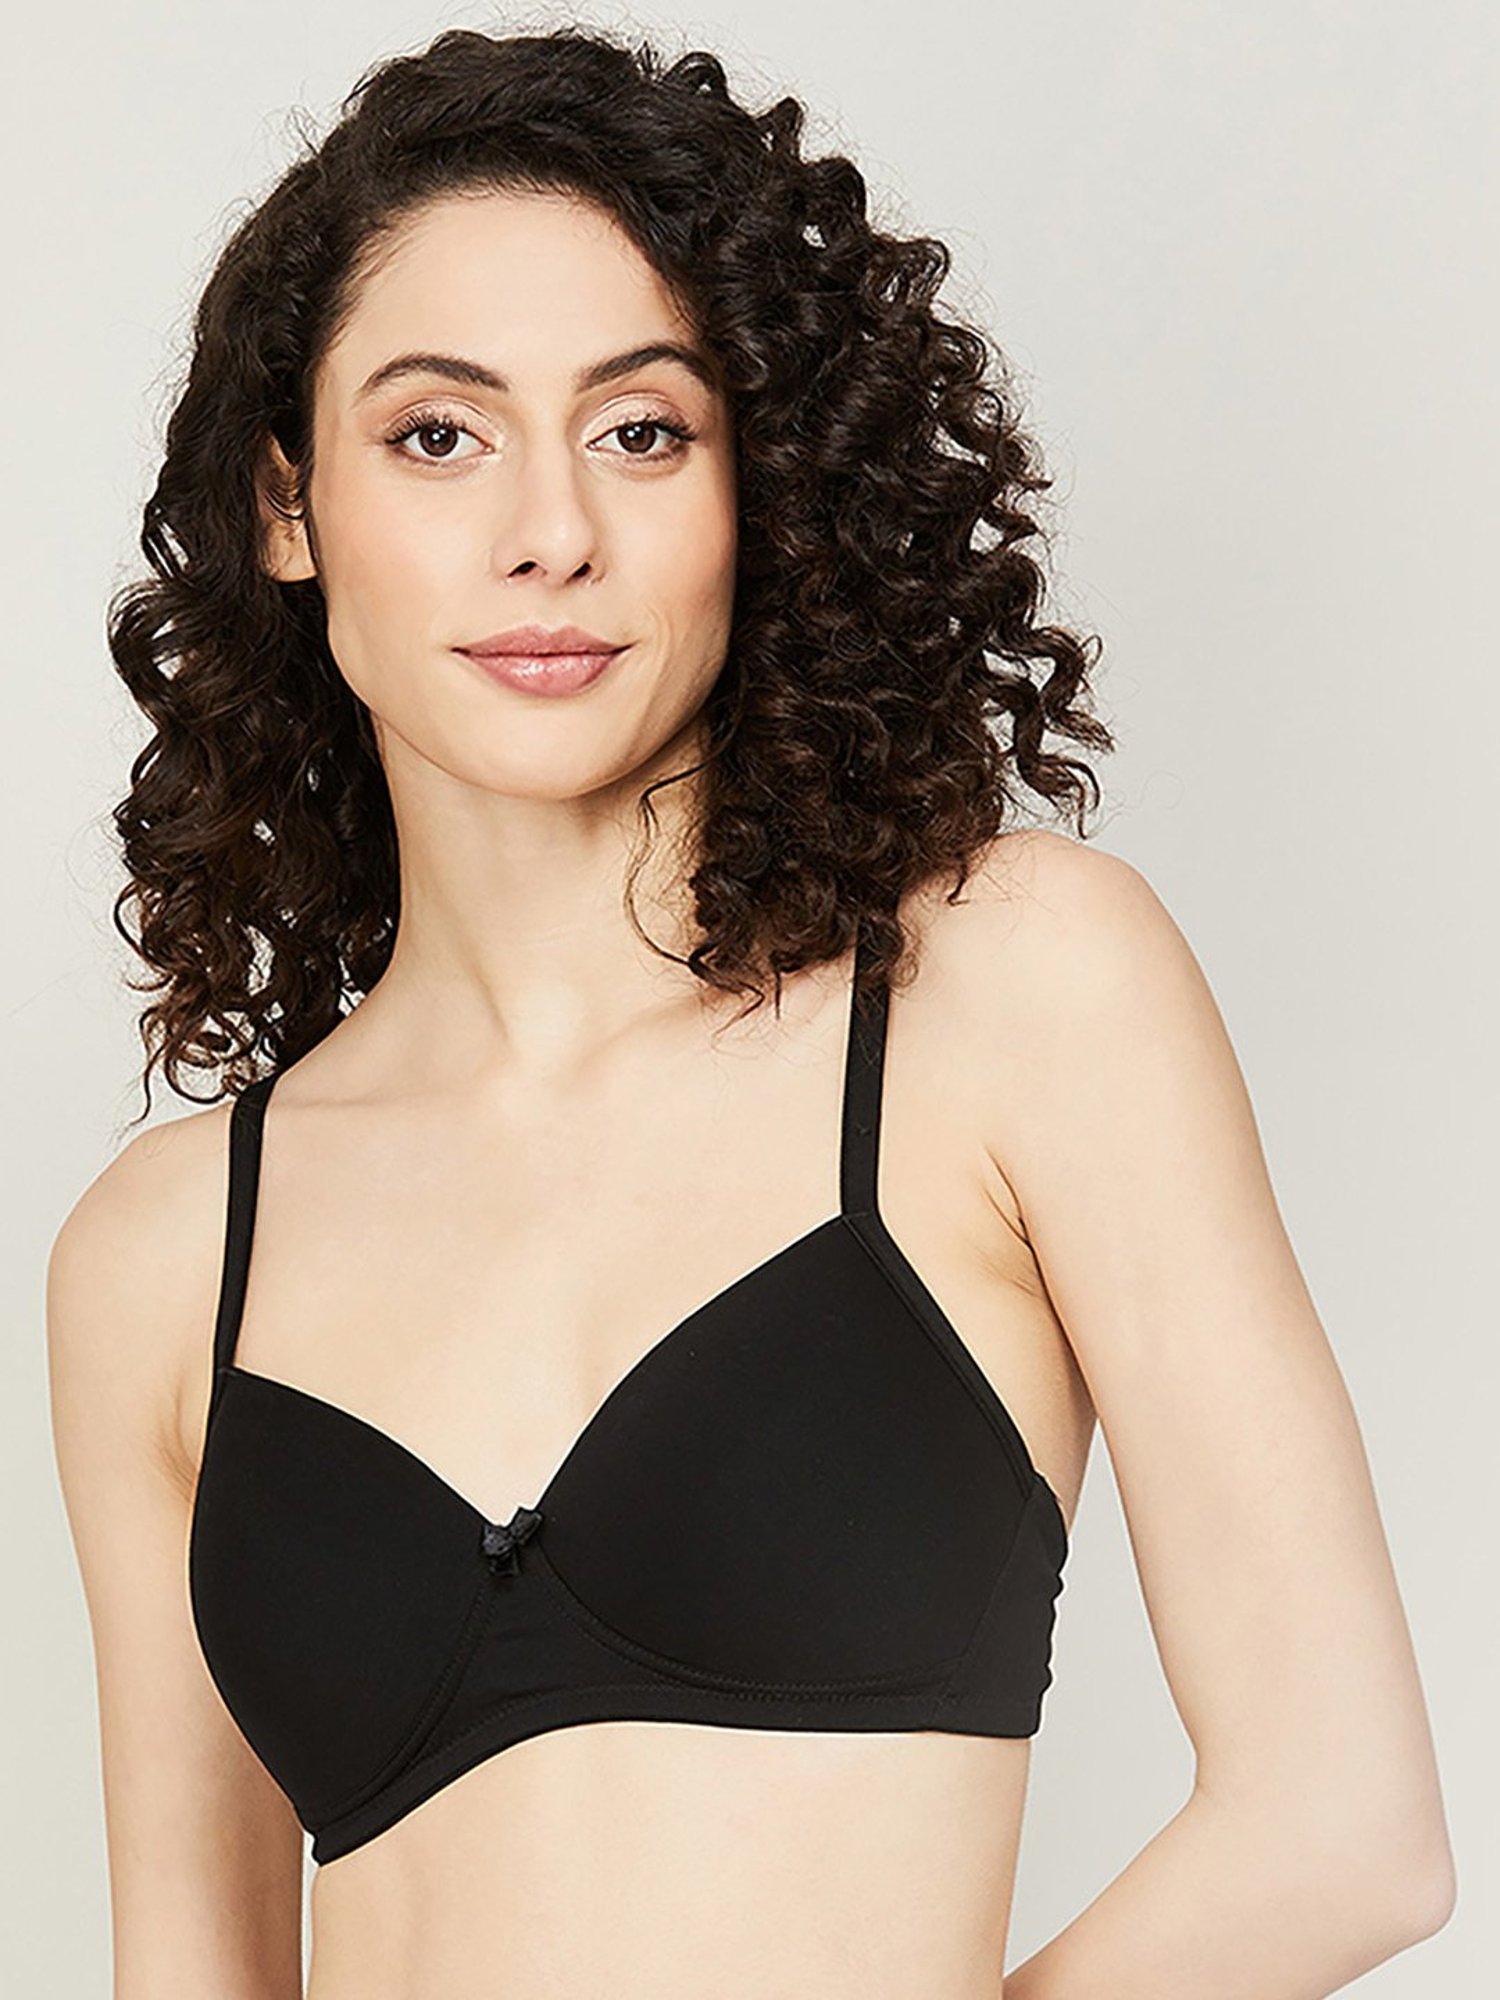 Ginger by Lifestyle Black & Blue Minimizer Bra - Pack Of 2